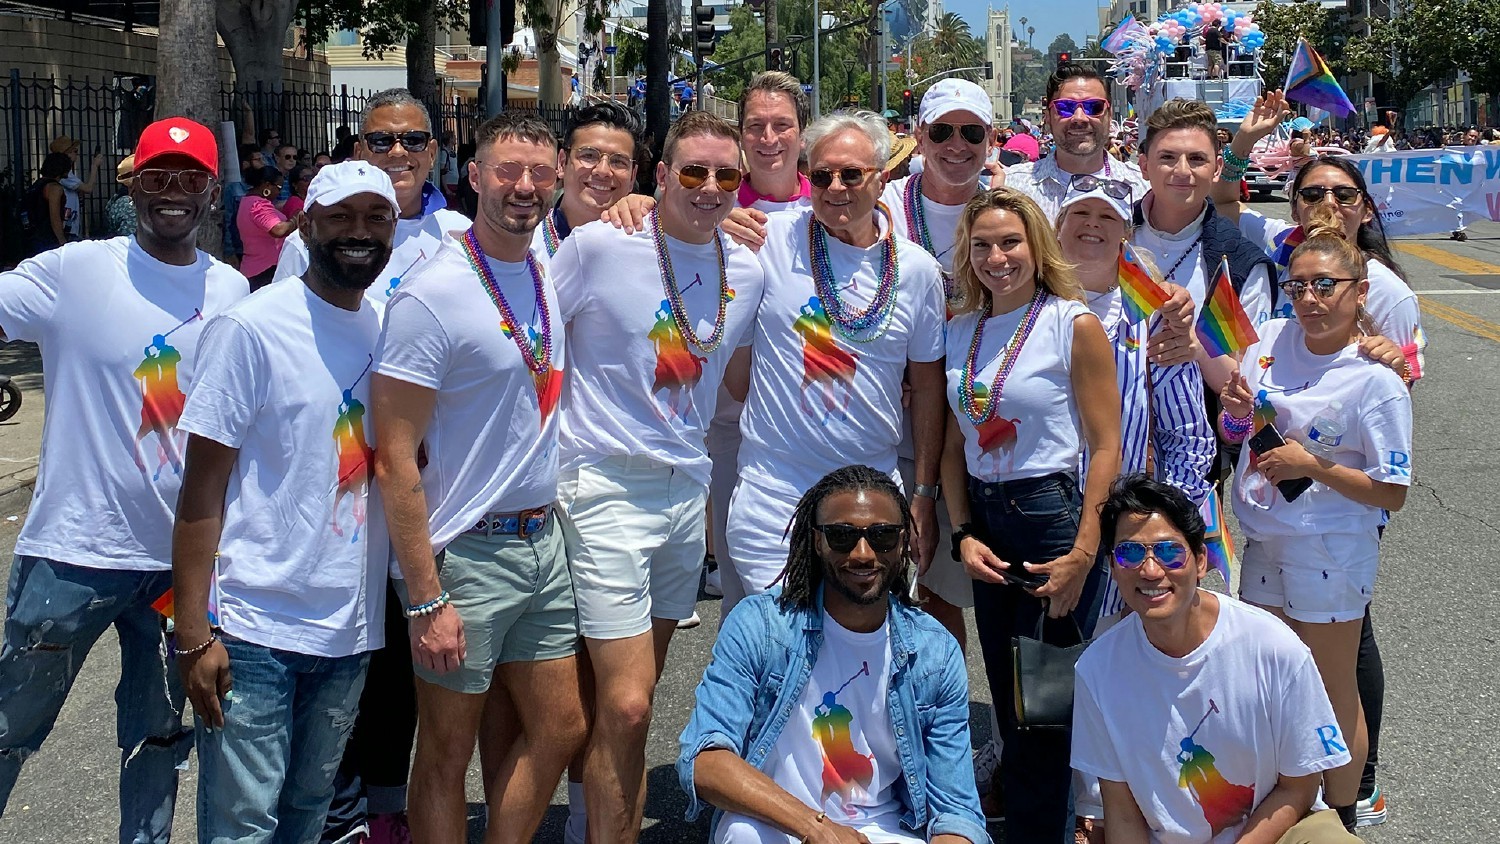 Beverly Hills Store Employees, Friends & Family celebrate #RLPride at the LA Pride Parade.